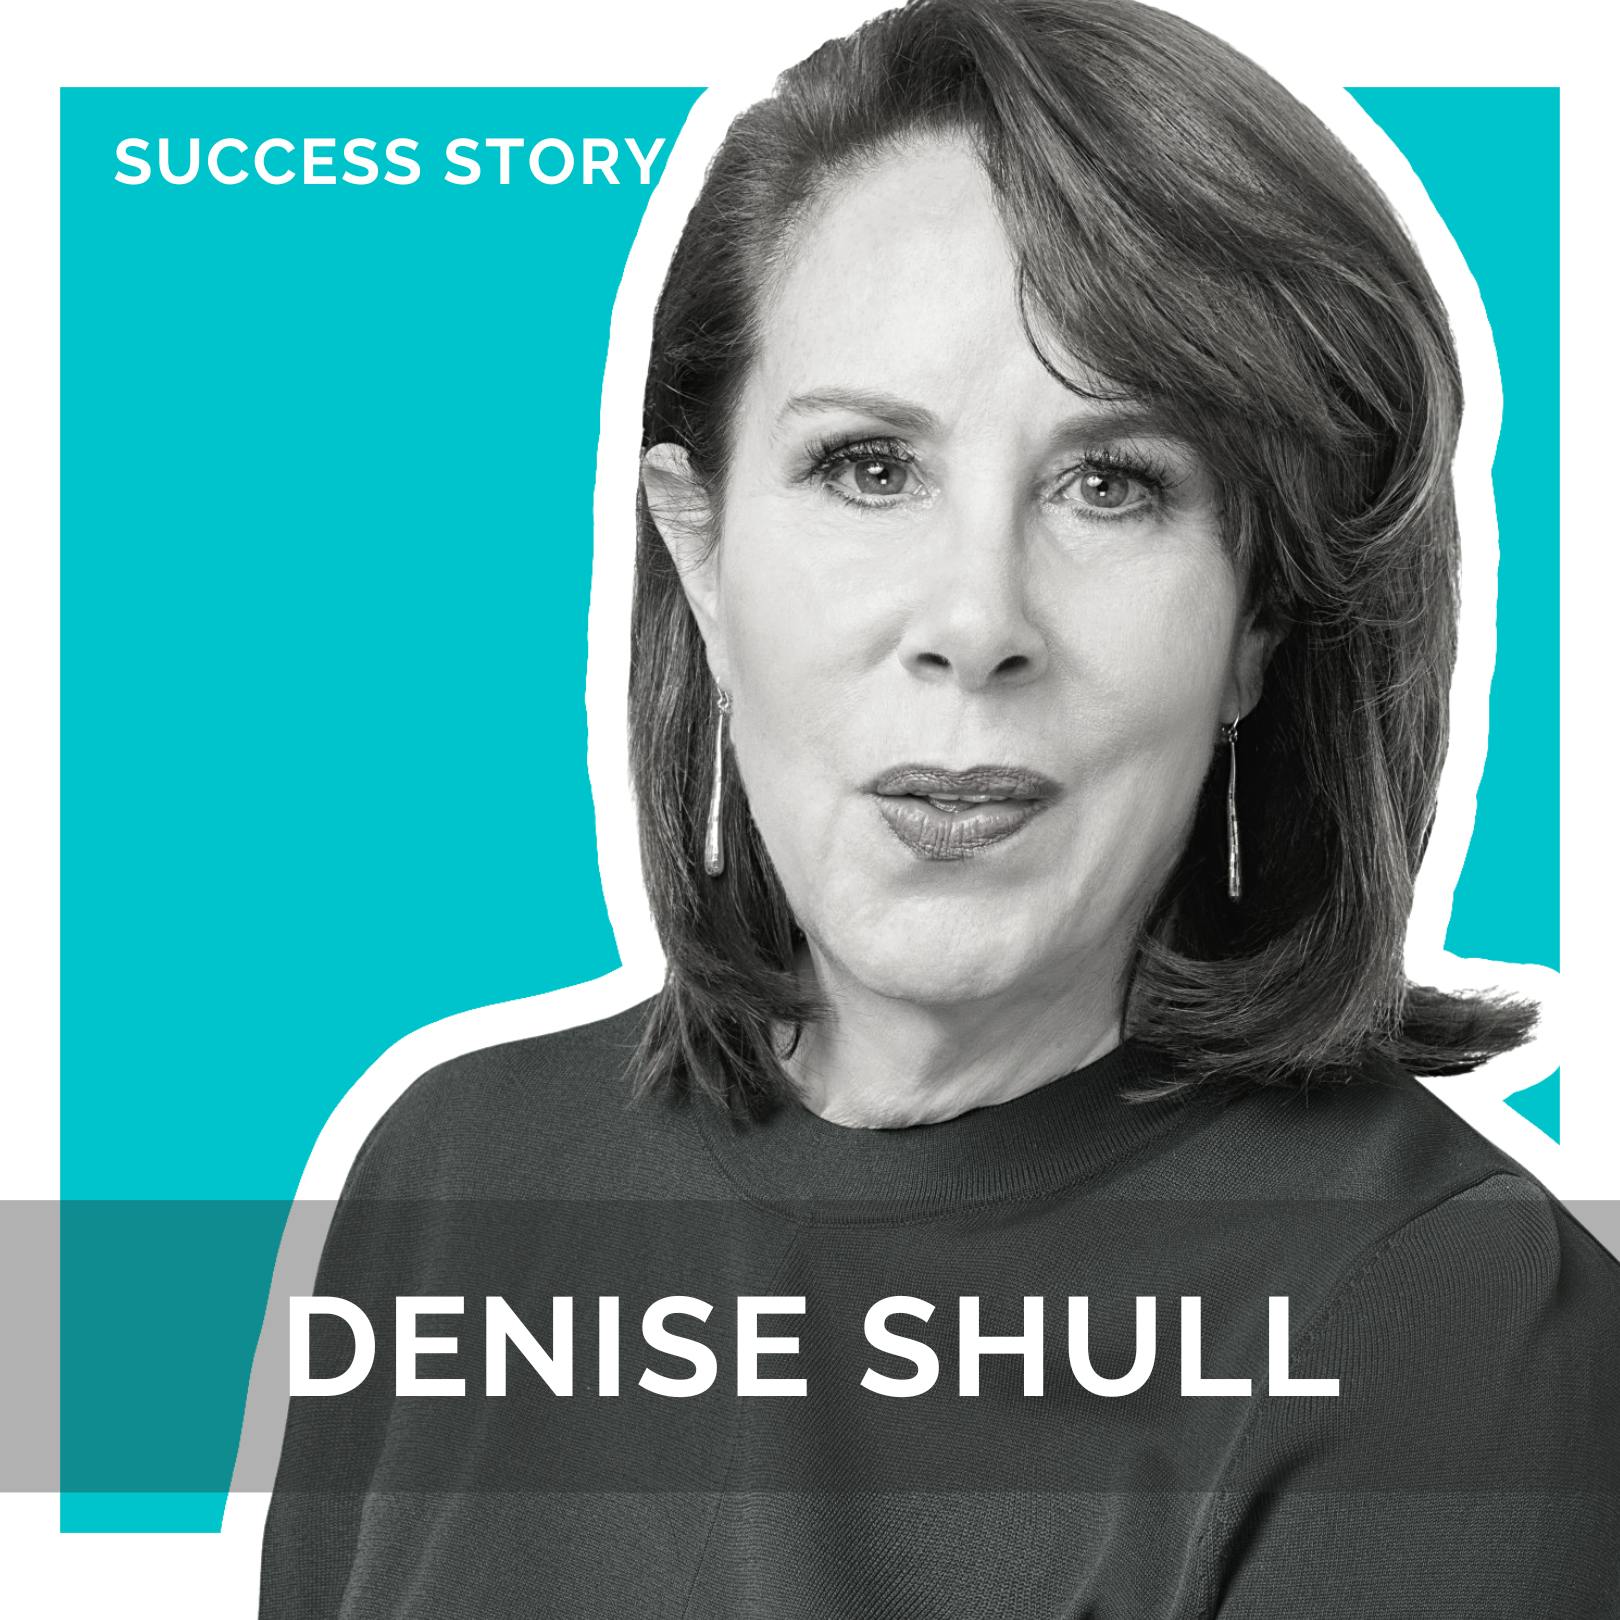 Denise Shull - Founder of The Rethink Group | How to Use Psychology for Trading, Investing & Risk